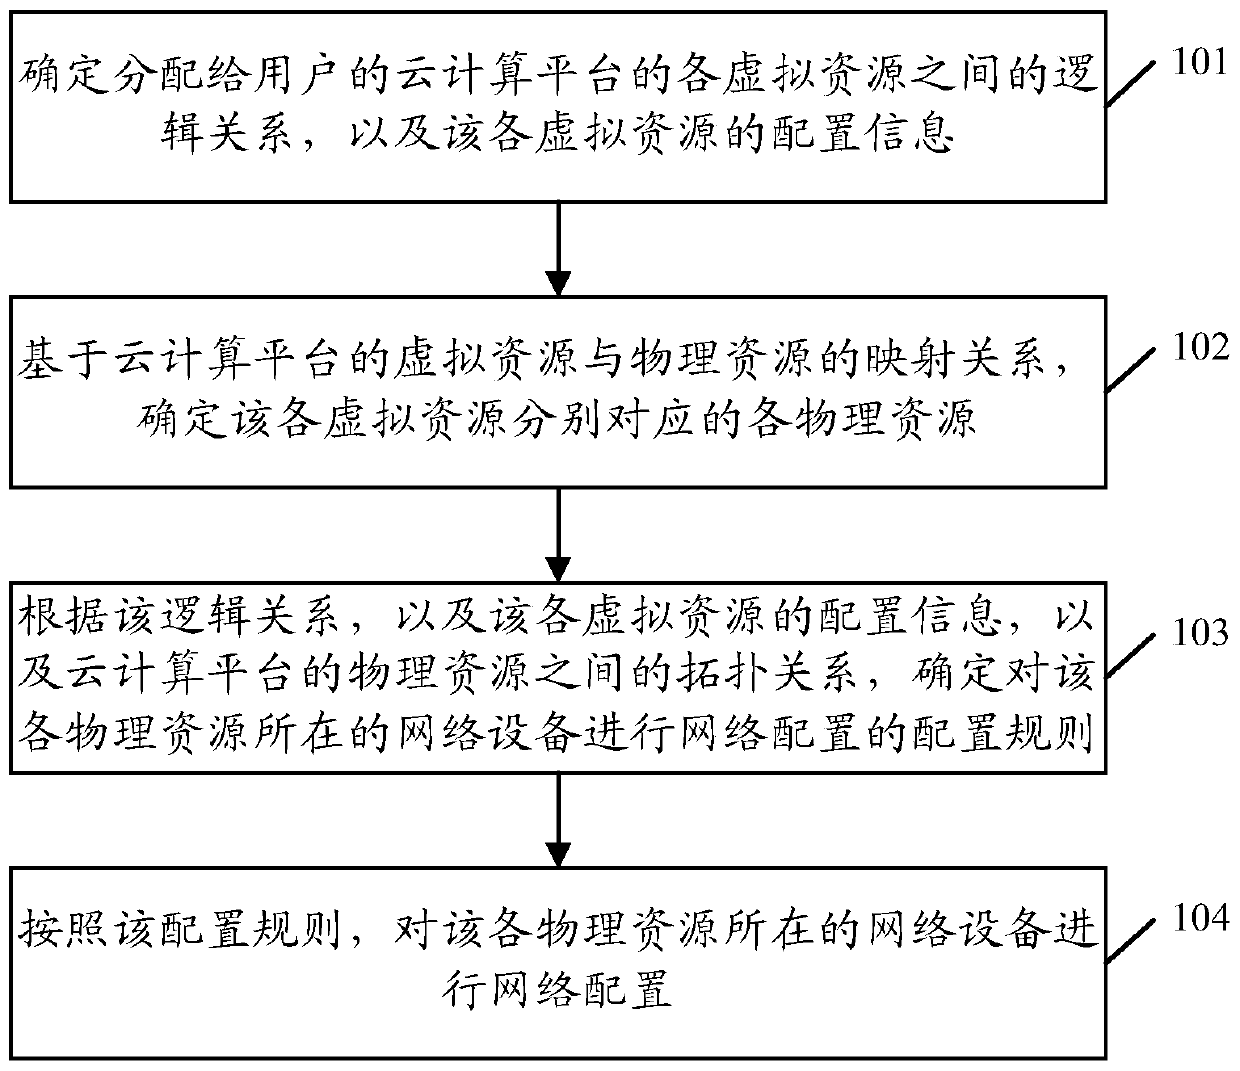 A network resource control method, device and system for a cloud computing platform